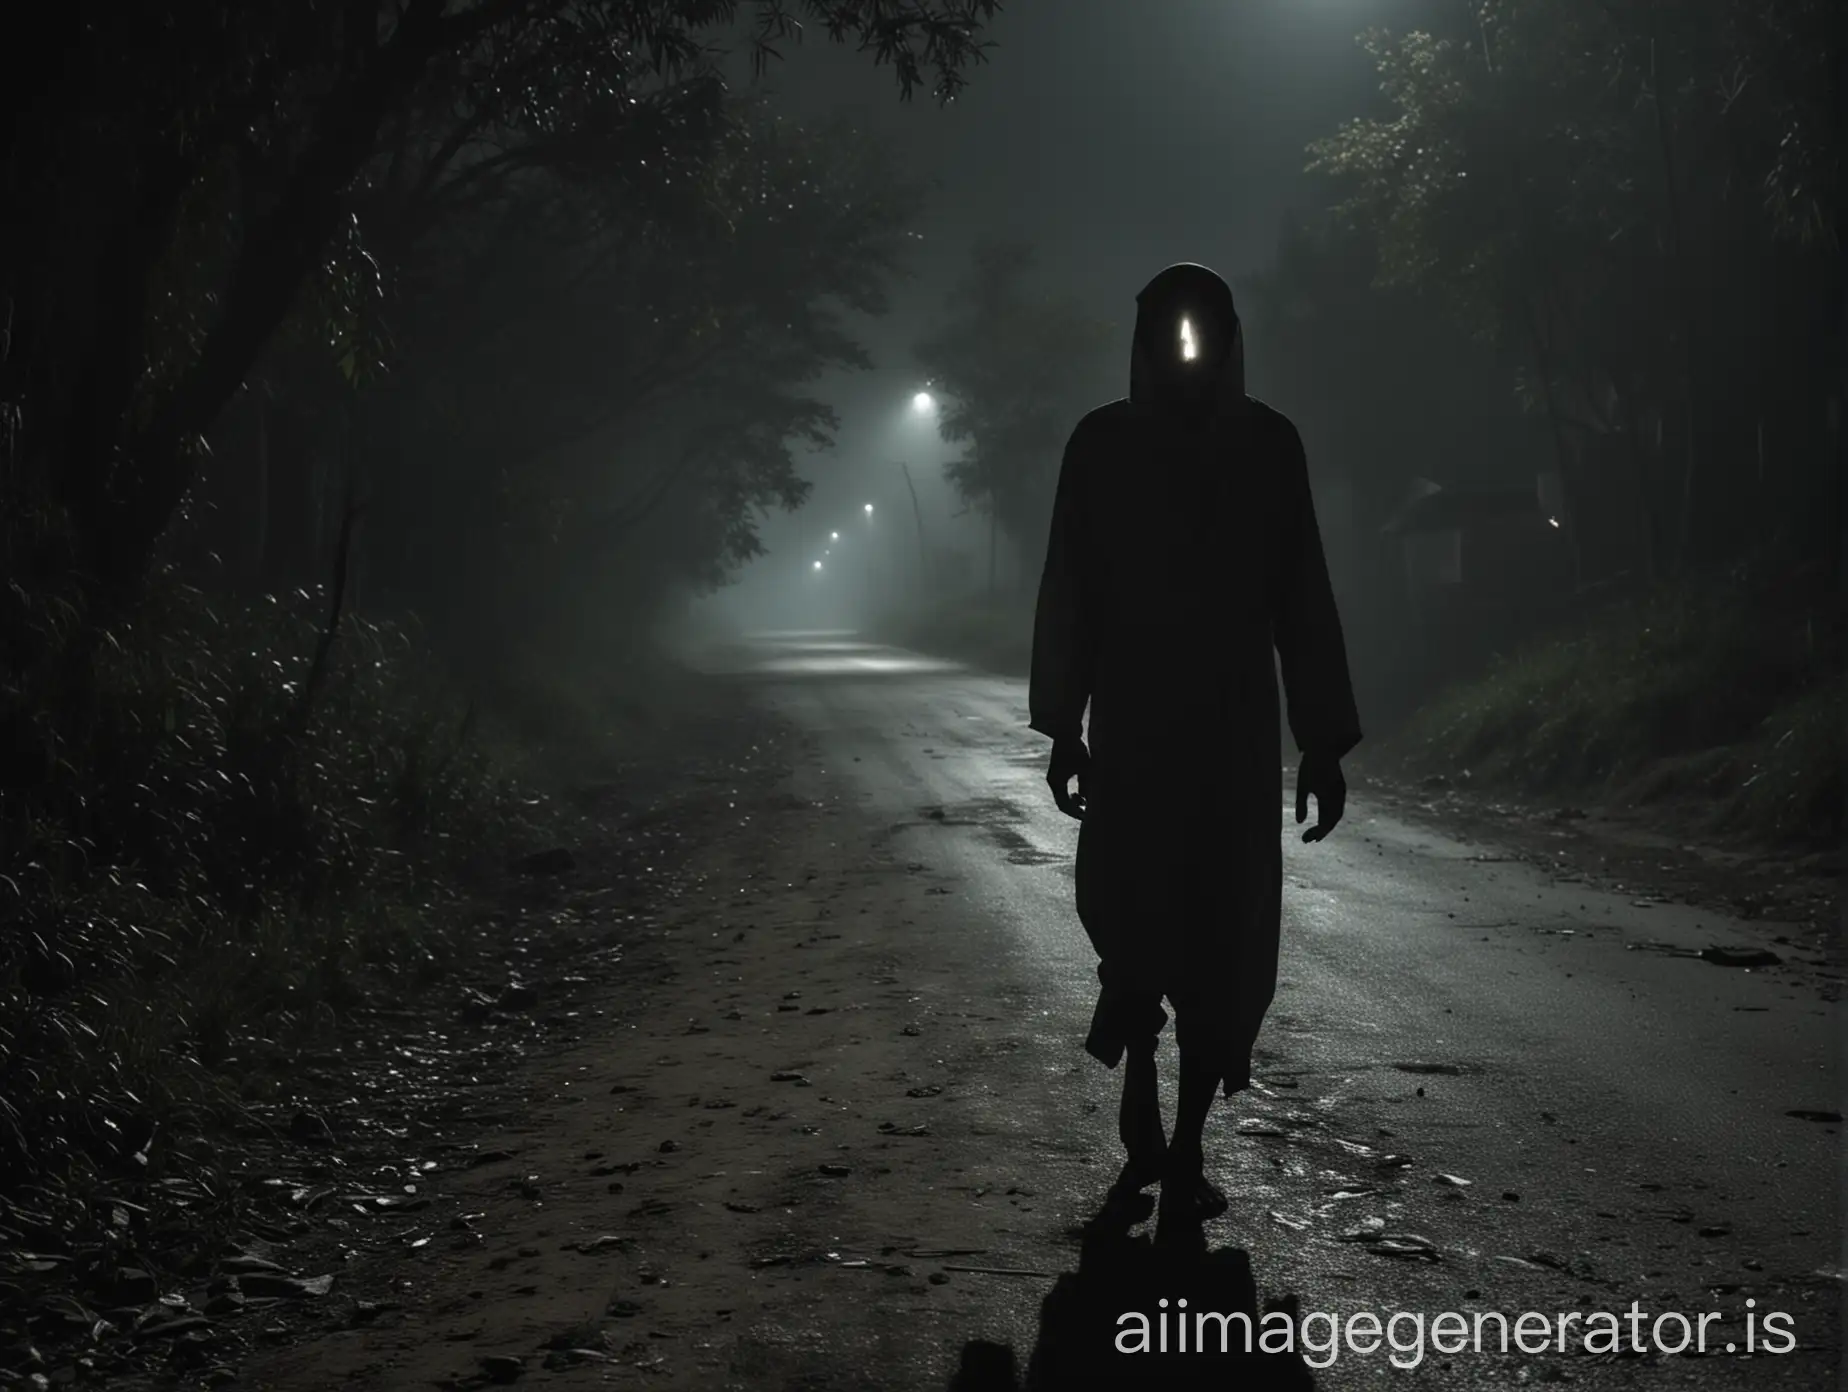 a village adult passenger's demeanor shifts to something more sinister and reveals his true eerie ghostly form. on a Bangladeshi dark village road at night.